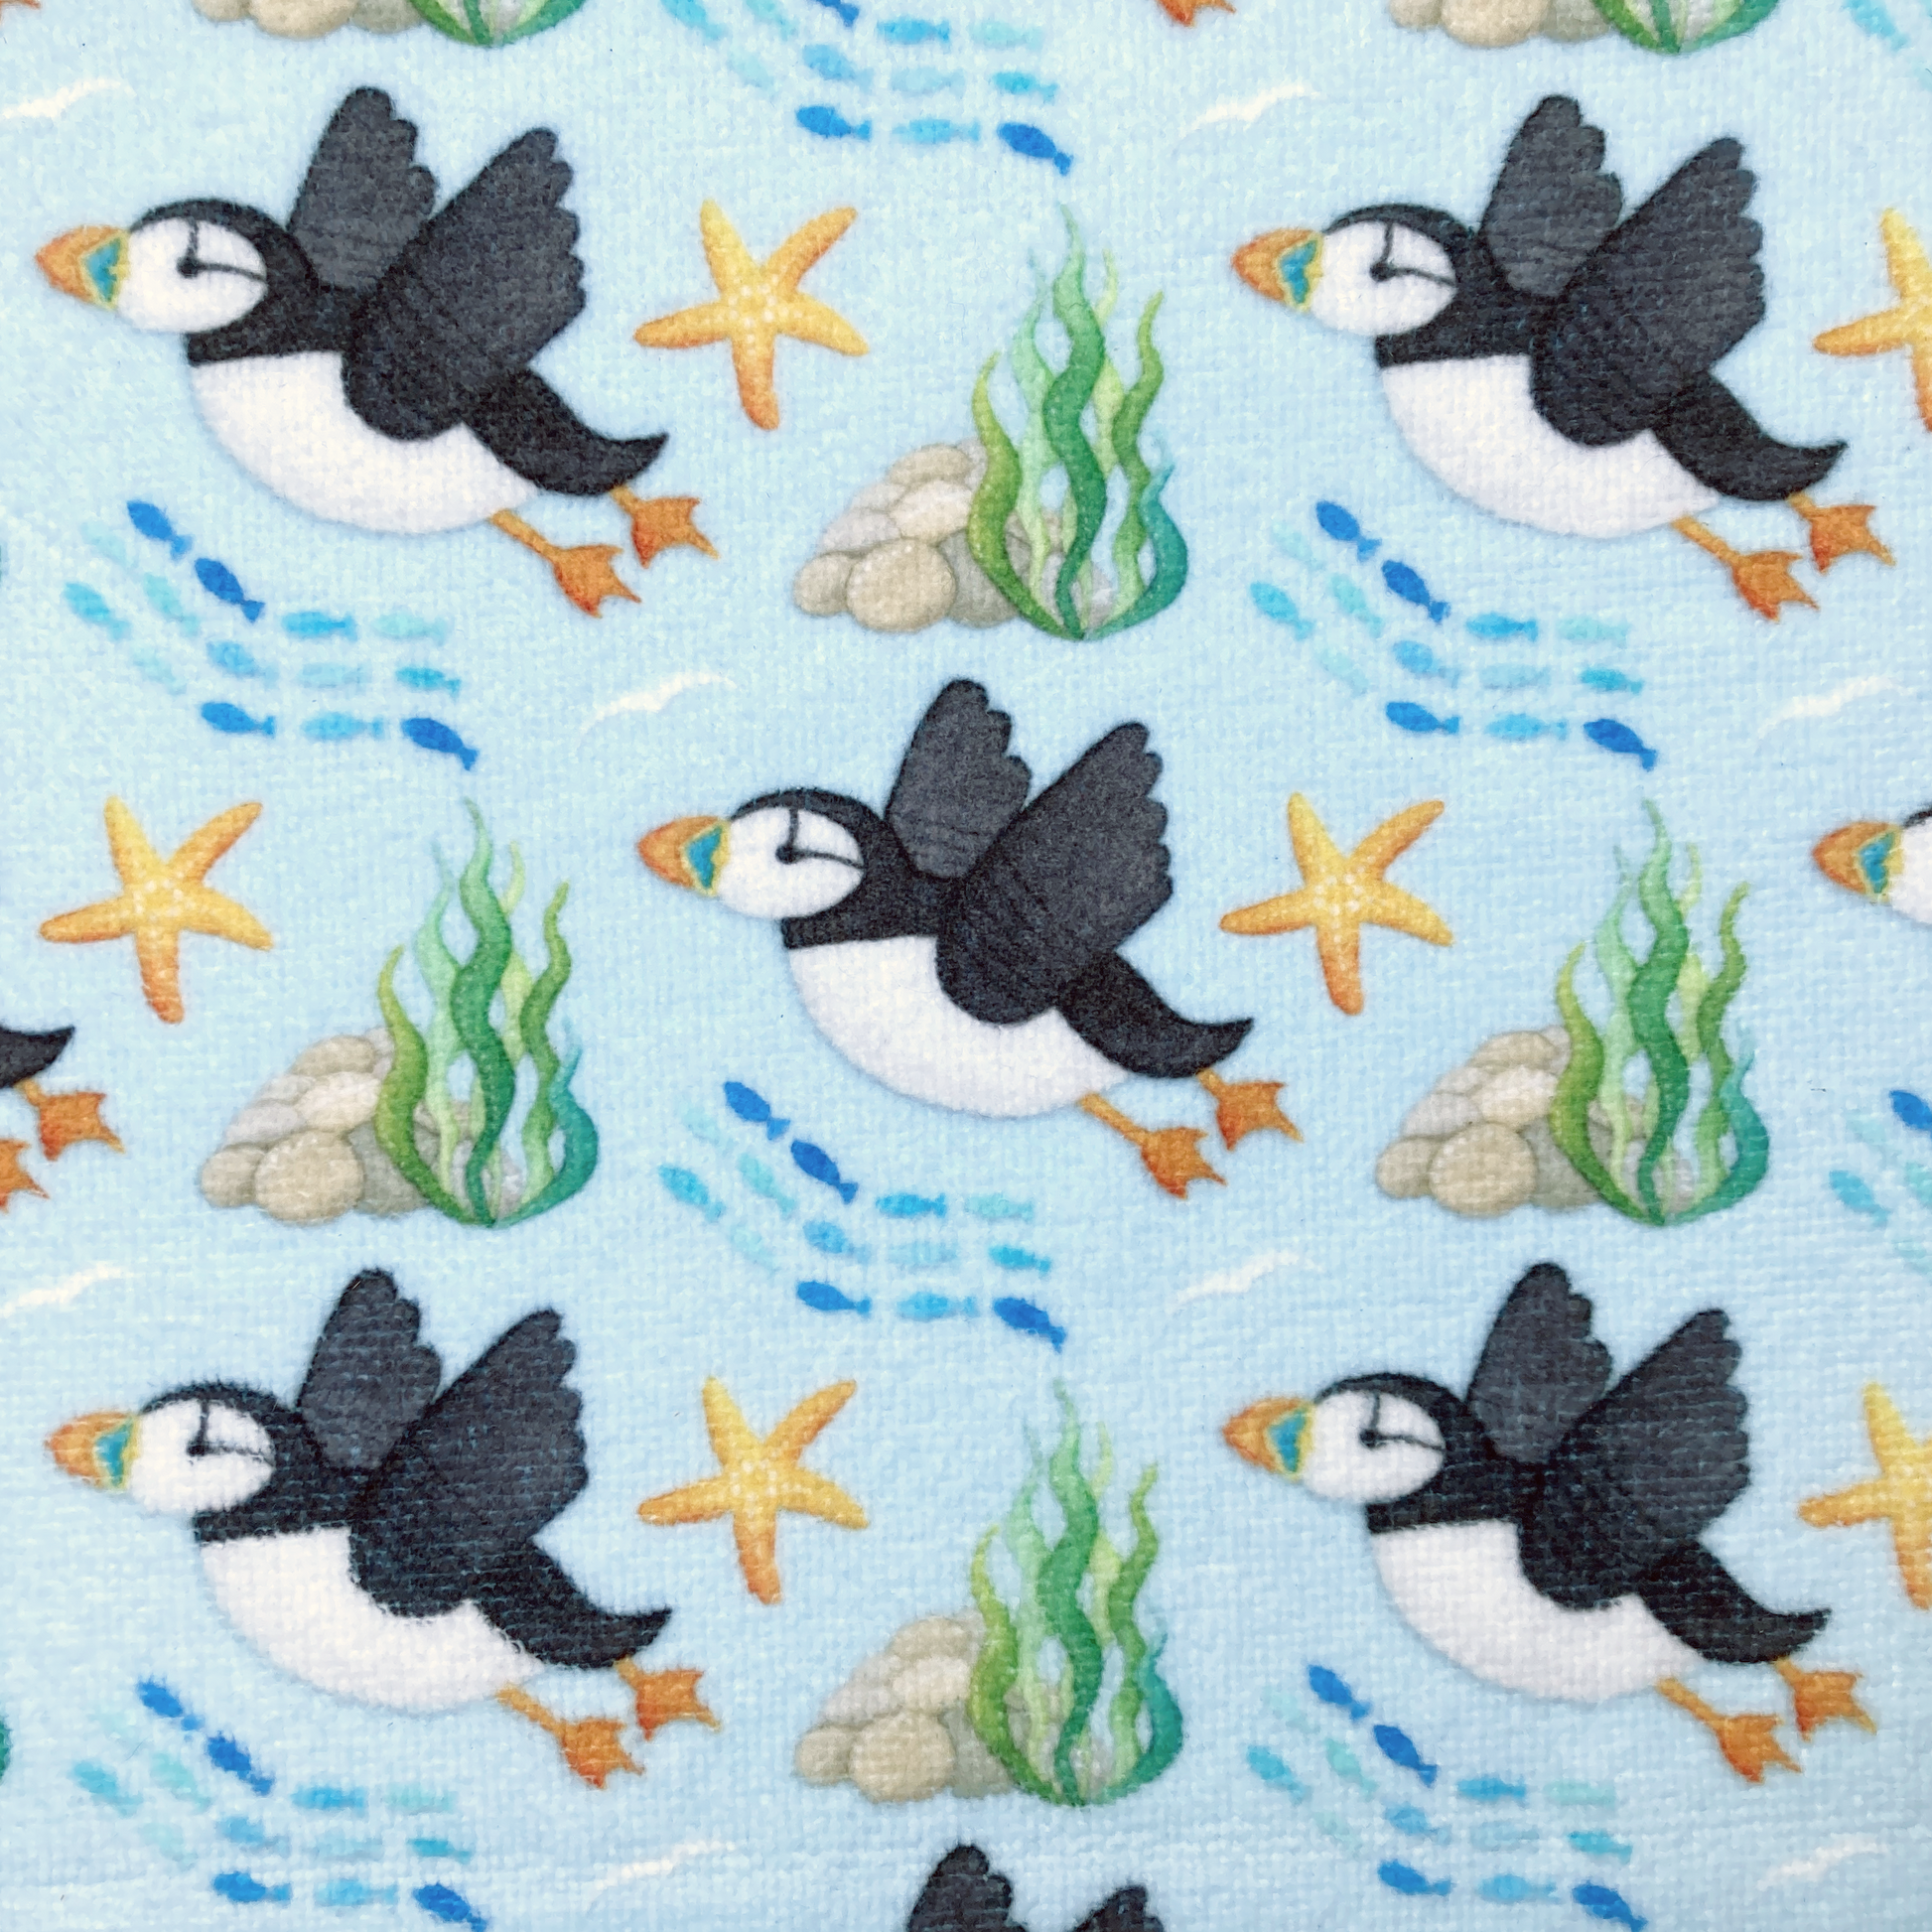 Puffin Tea Towel or Hand Towel - Fluffy Style - Seaside Kitchen Towel - East Neuk Beach Crafts